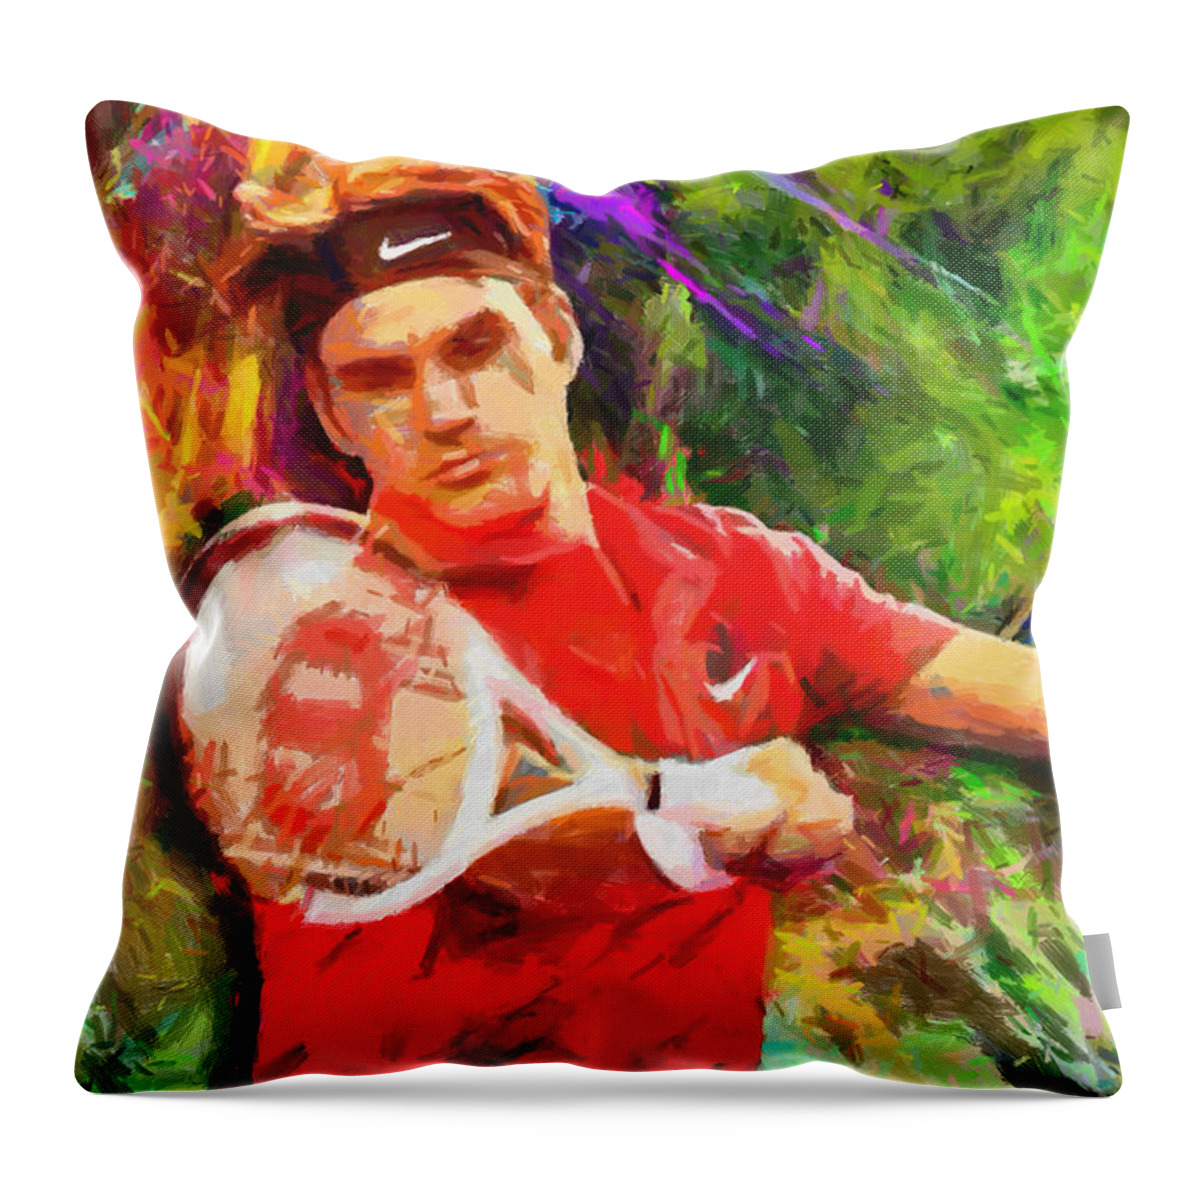 Roger Federer Throw Pillow featuring the digital art Roger Federer by RochVanh